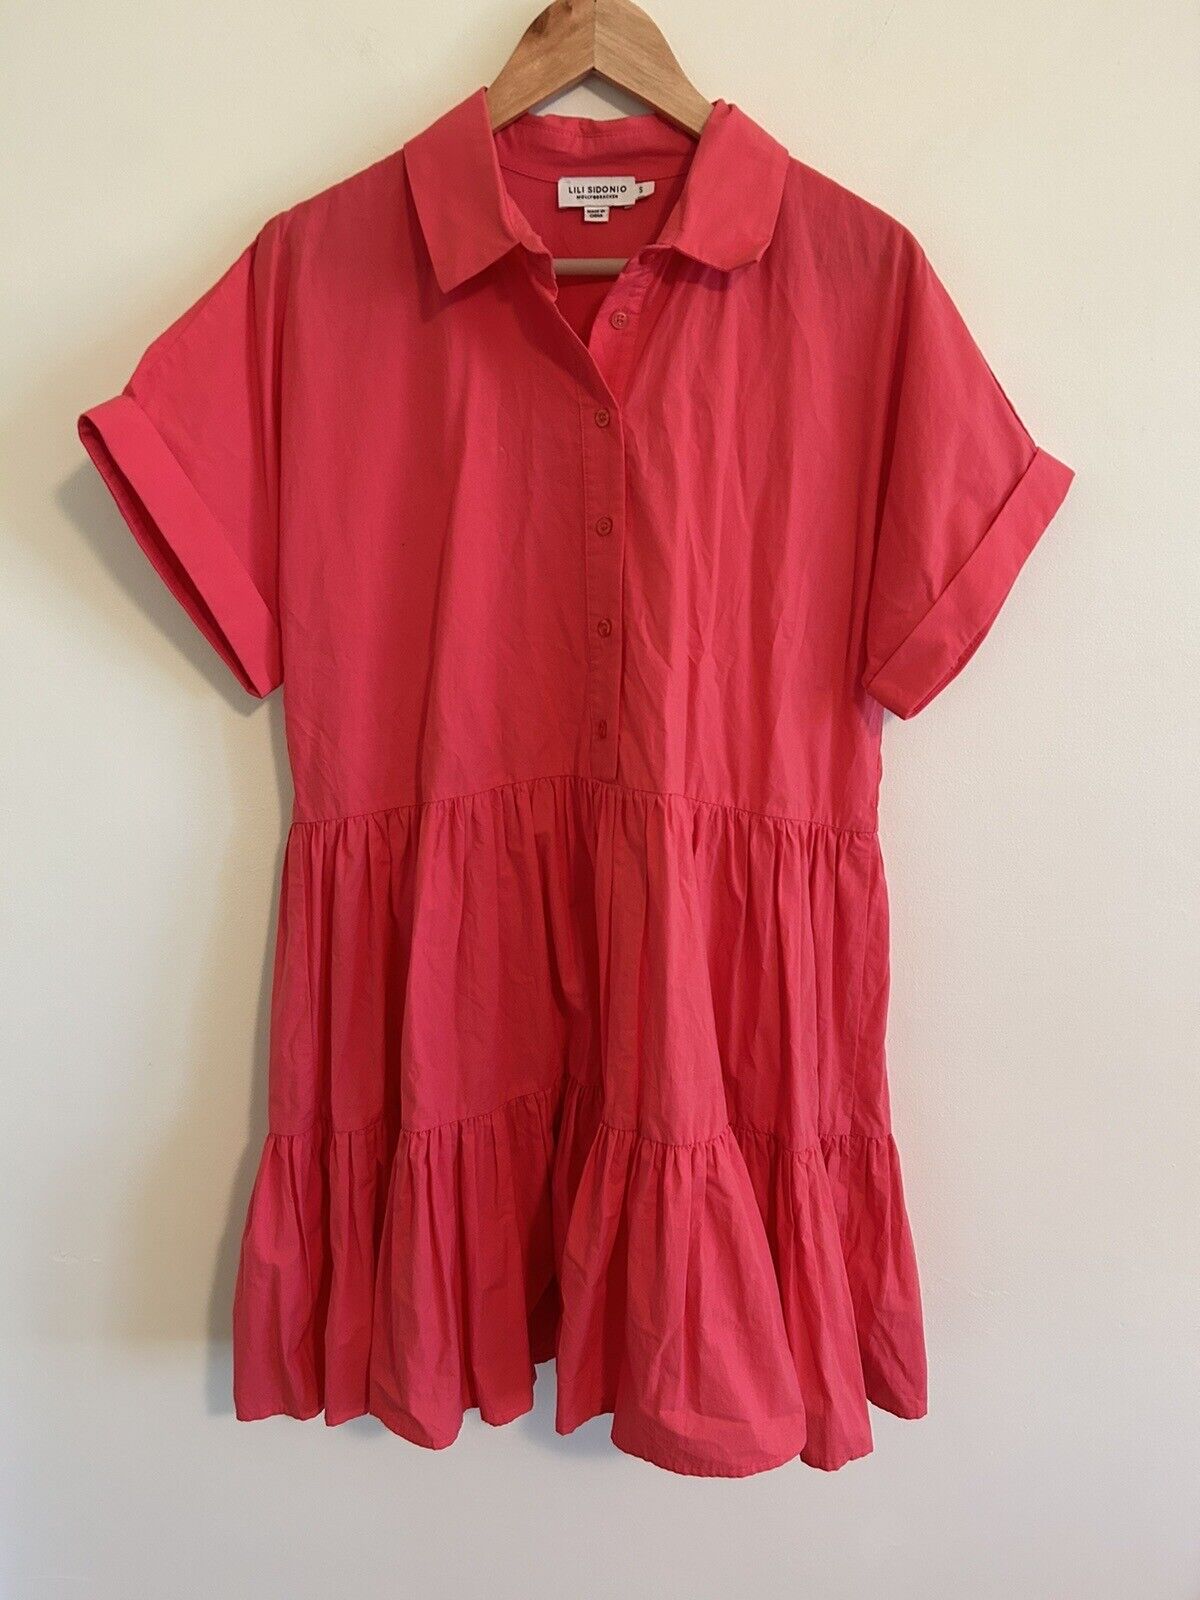 LILI SIDONIO MOLLY BRACKEN Tiered 6-Button BABYDOLL Dress Coral Size Small Coral